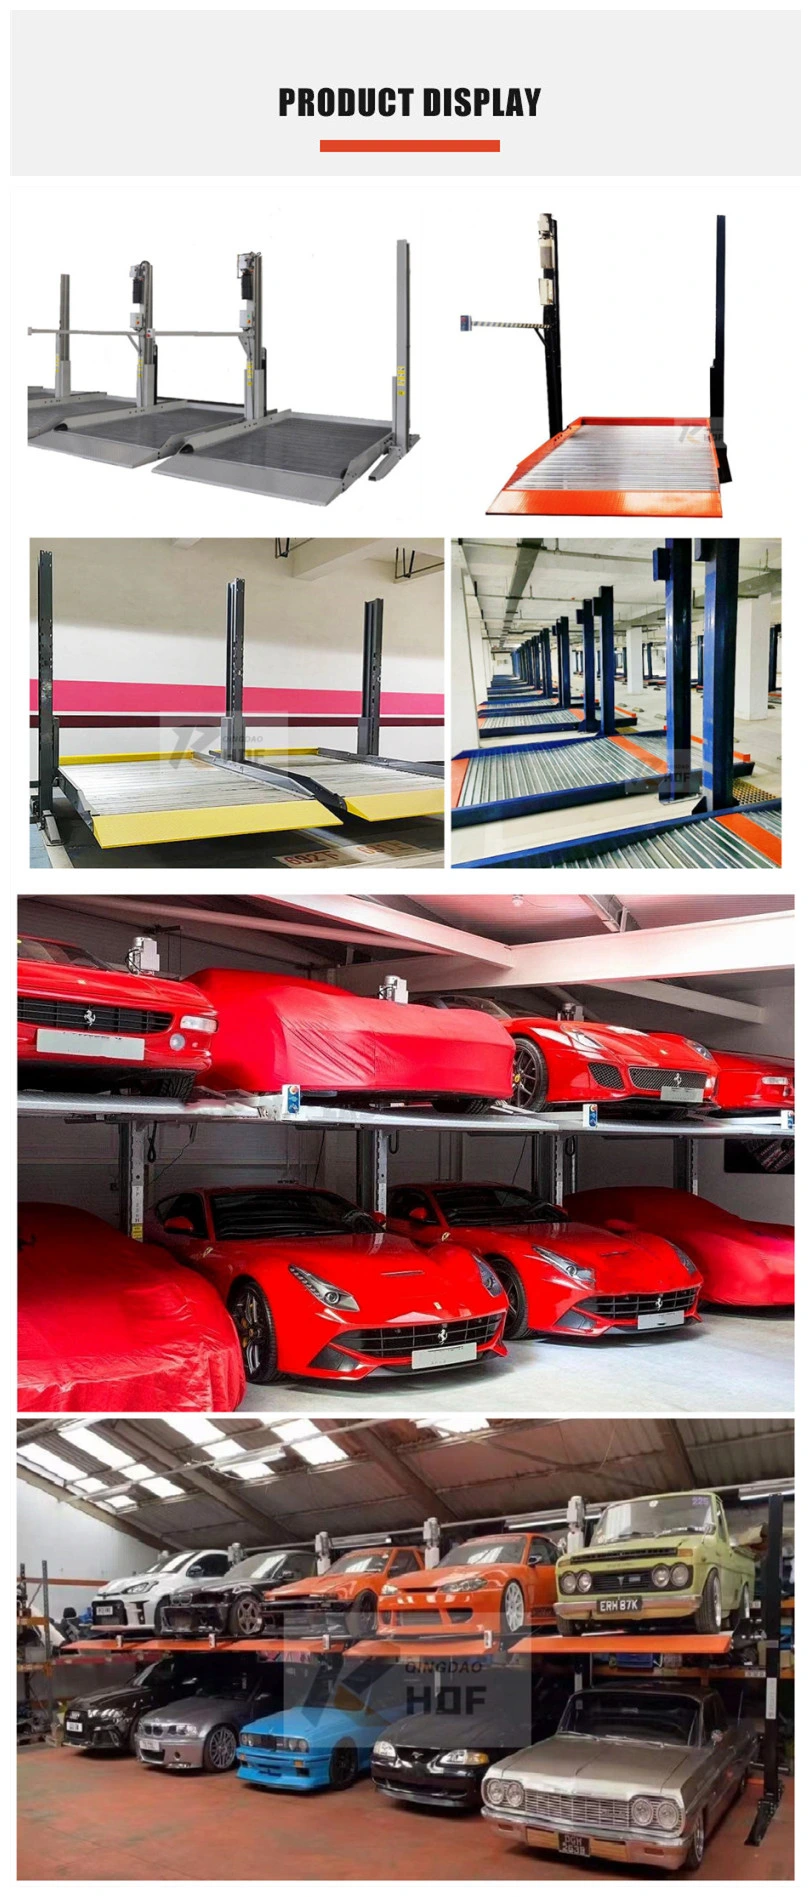 2 Post Car Stacker Inground Parking 2t Capacity Two Post Pit Type Car Parking System